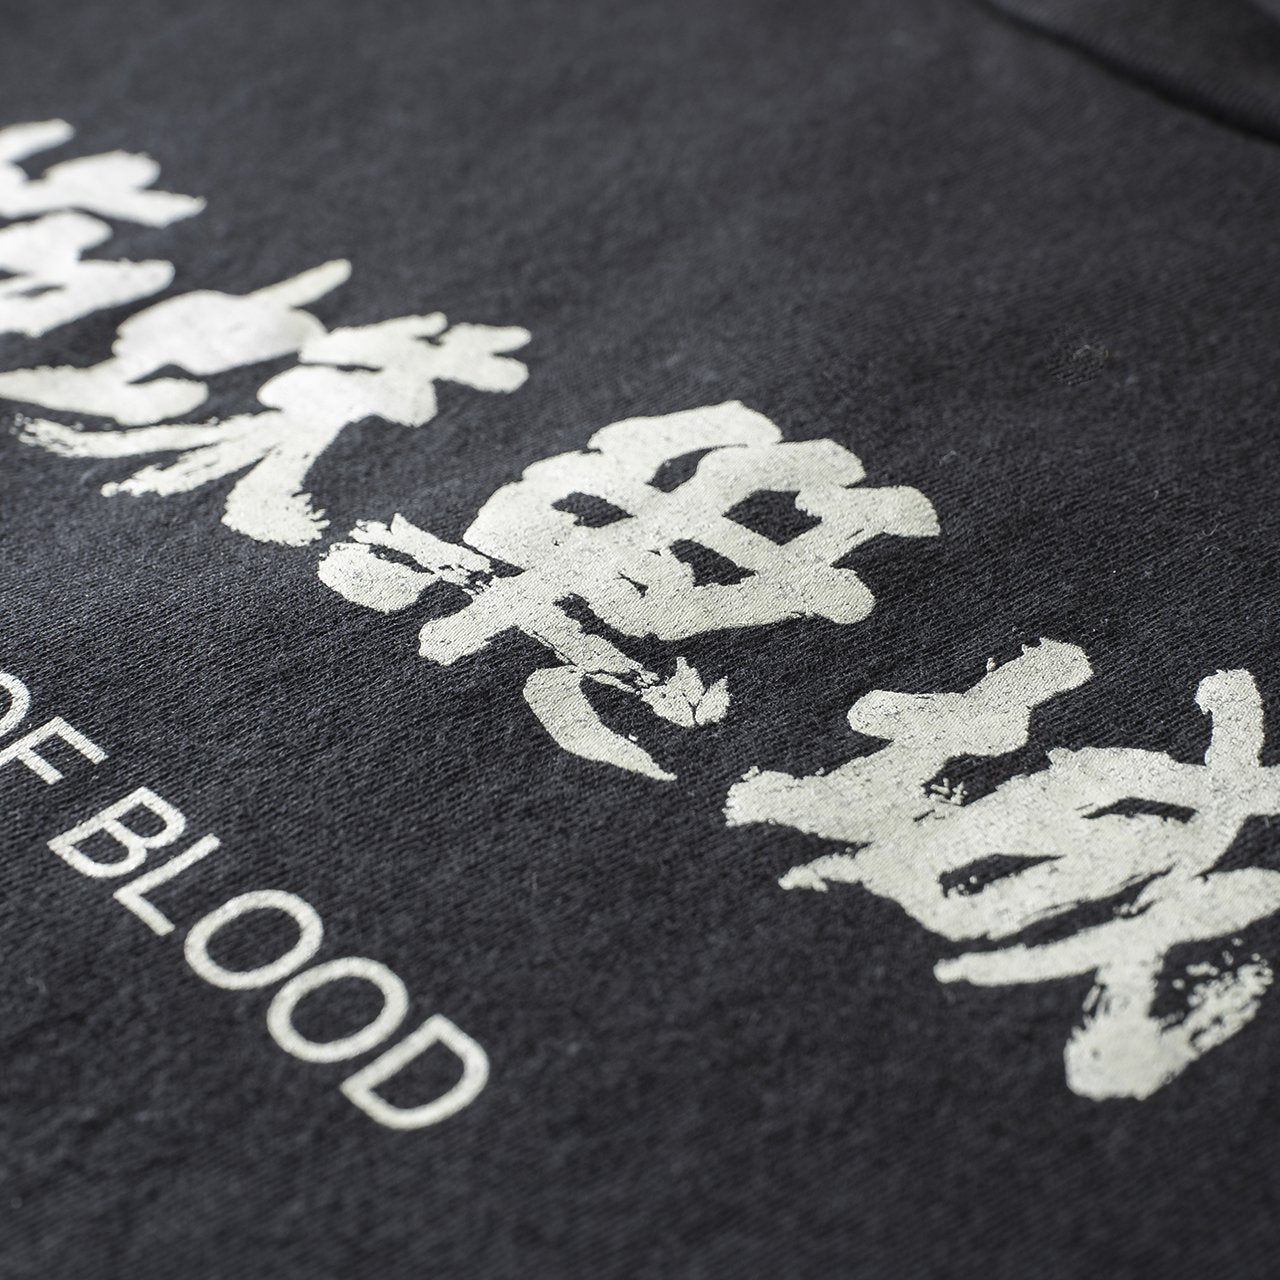 undercover undercover 'throne of blood' s/s t-shirt (black)